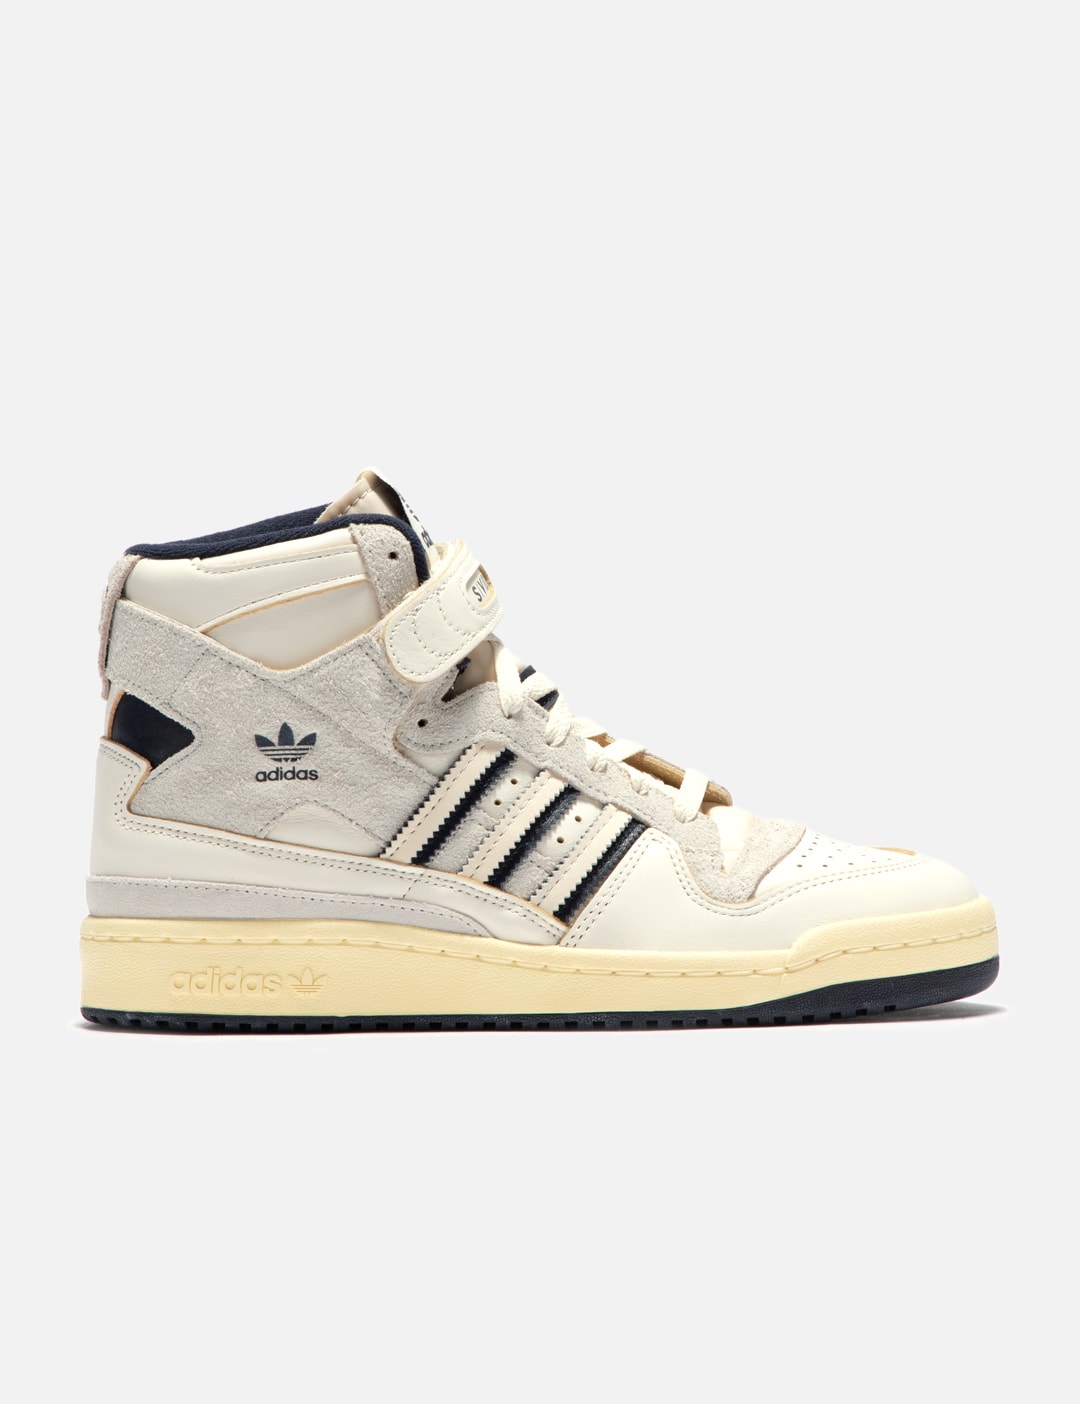 groef lobby wijs Adidas - Adidas Forum 84 High SVD | HBX - Globally Curated Fashion and  Lifestyle by Hypebeast